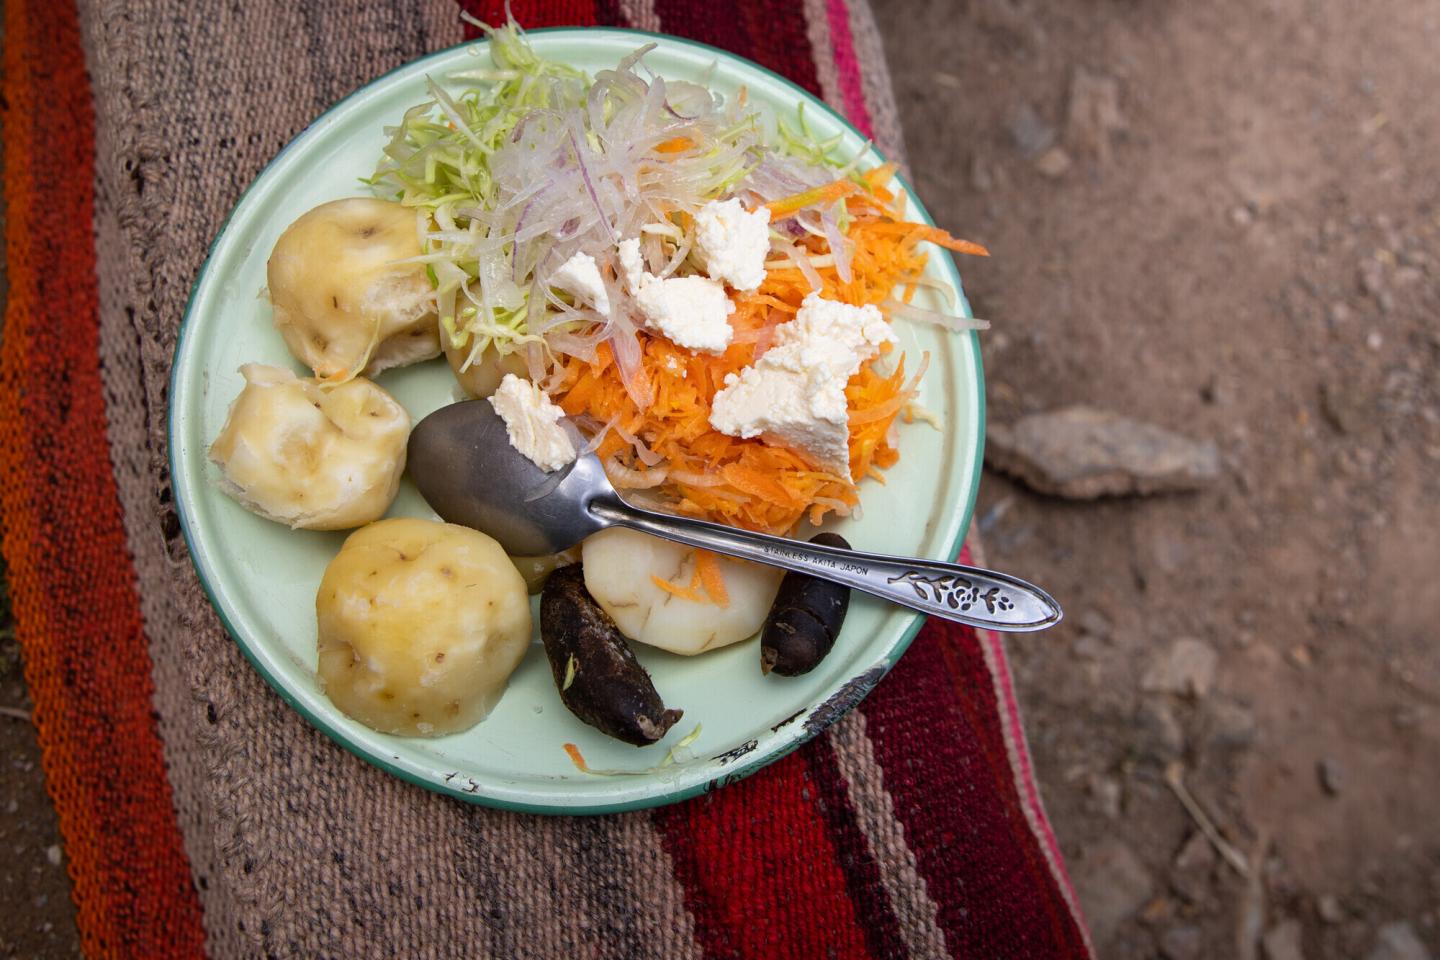 A plate and spoon with potatoes and salad